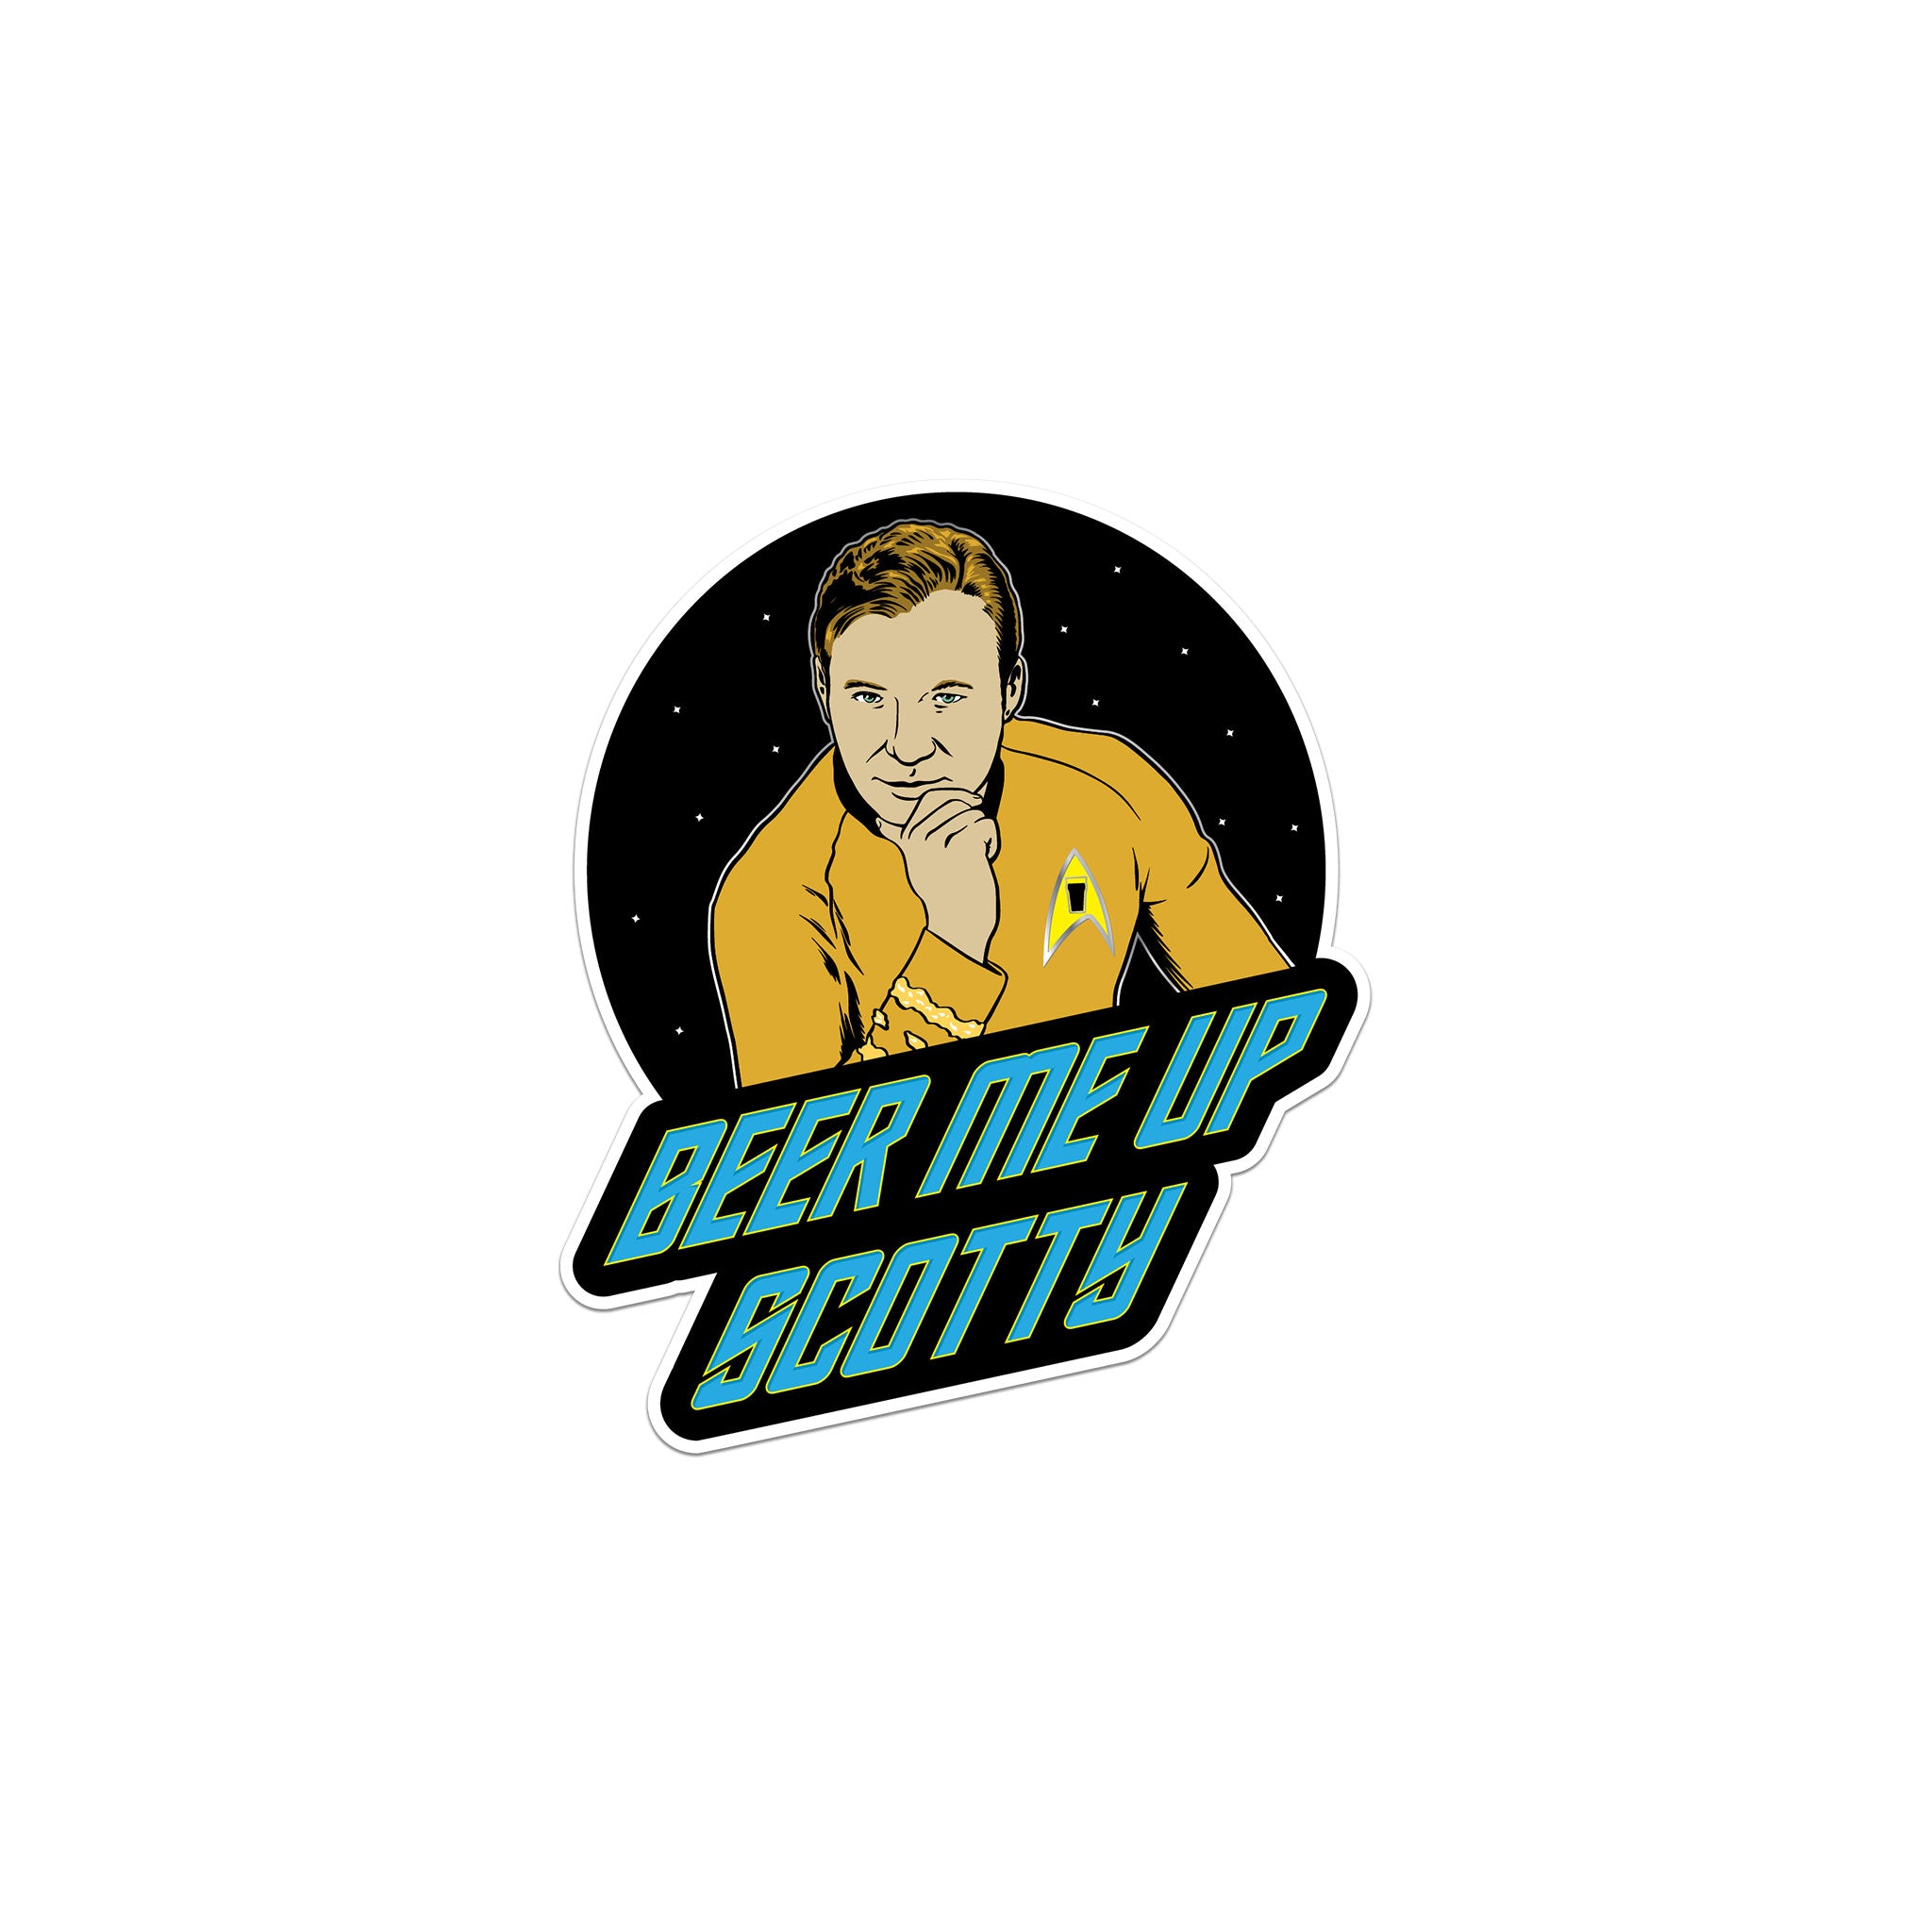 Beer Me Up Scotty Sticker – The Chivery